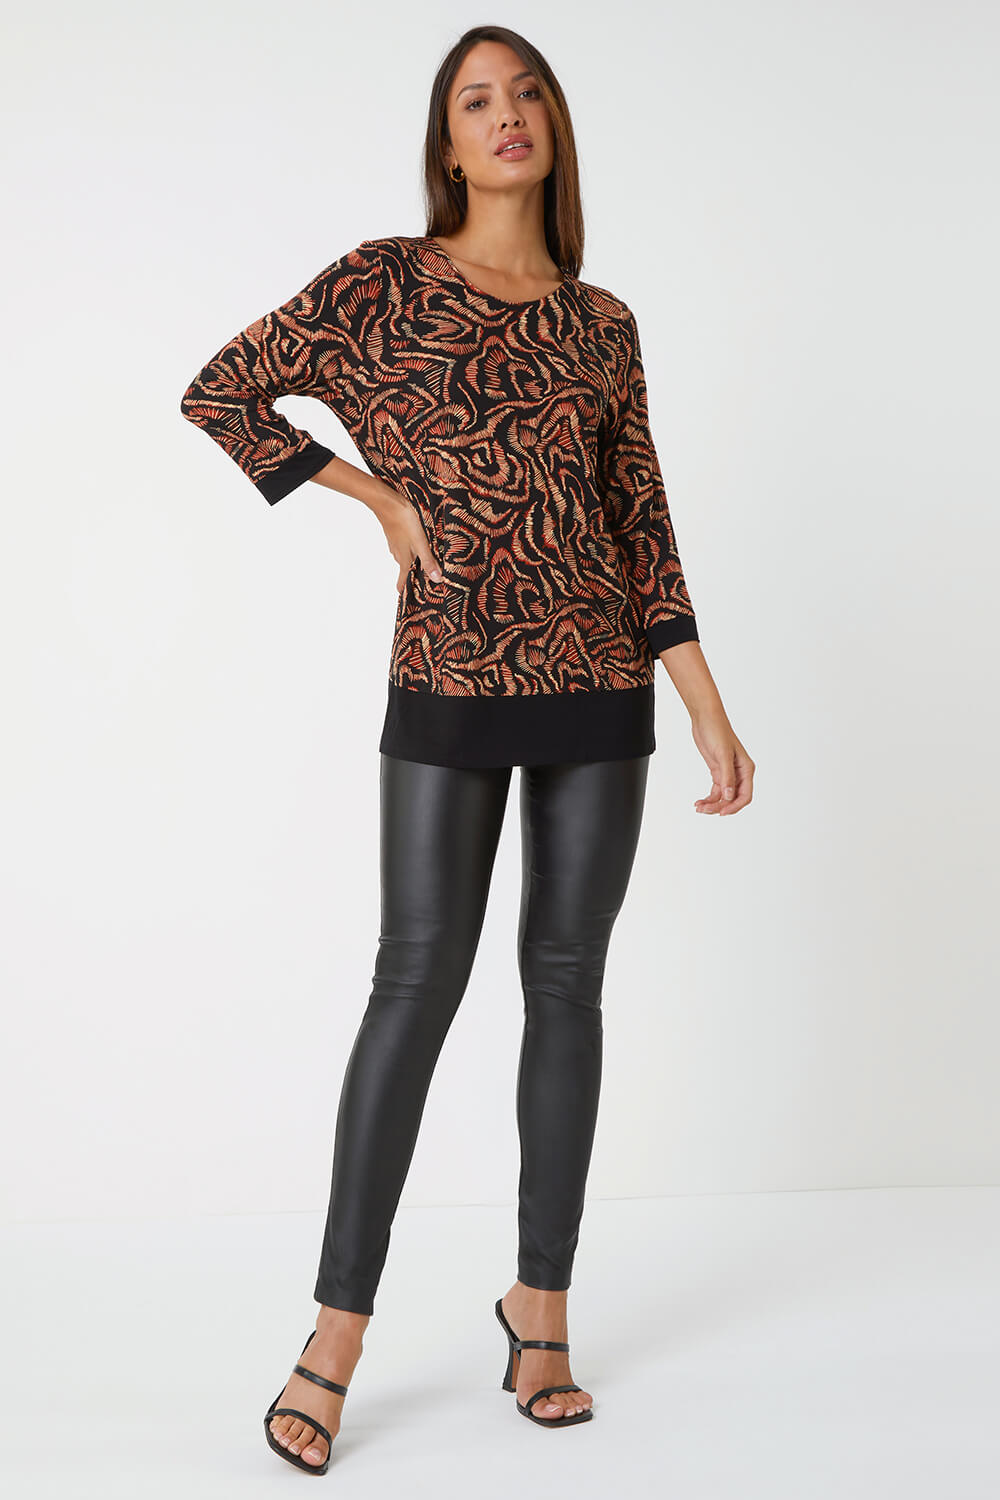 Rust Abstract Contrast Hem Stretch Top, Image 2 of 5